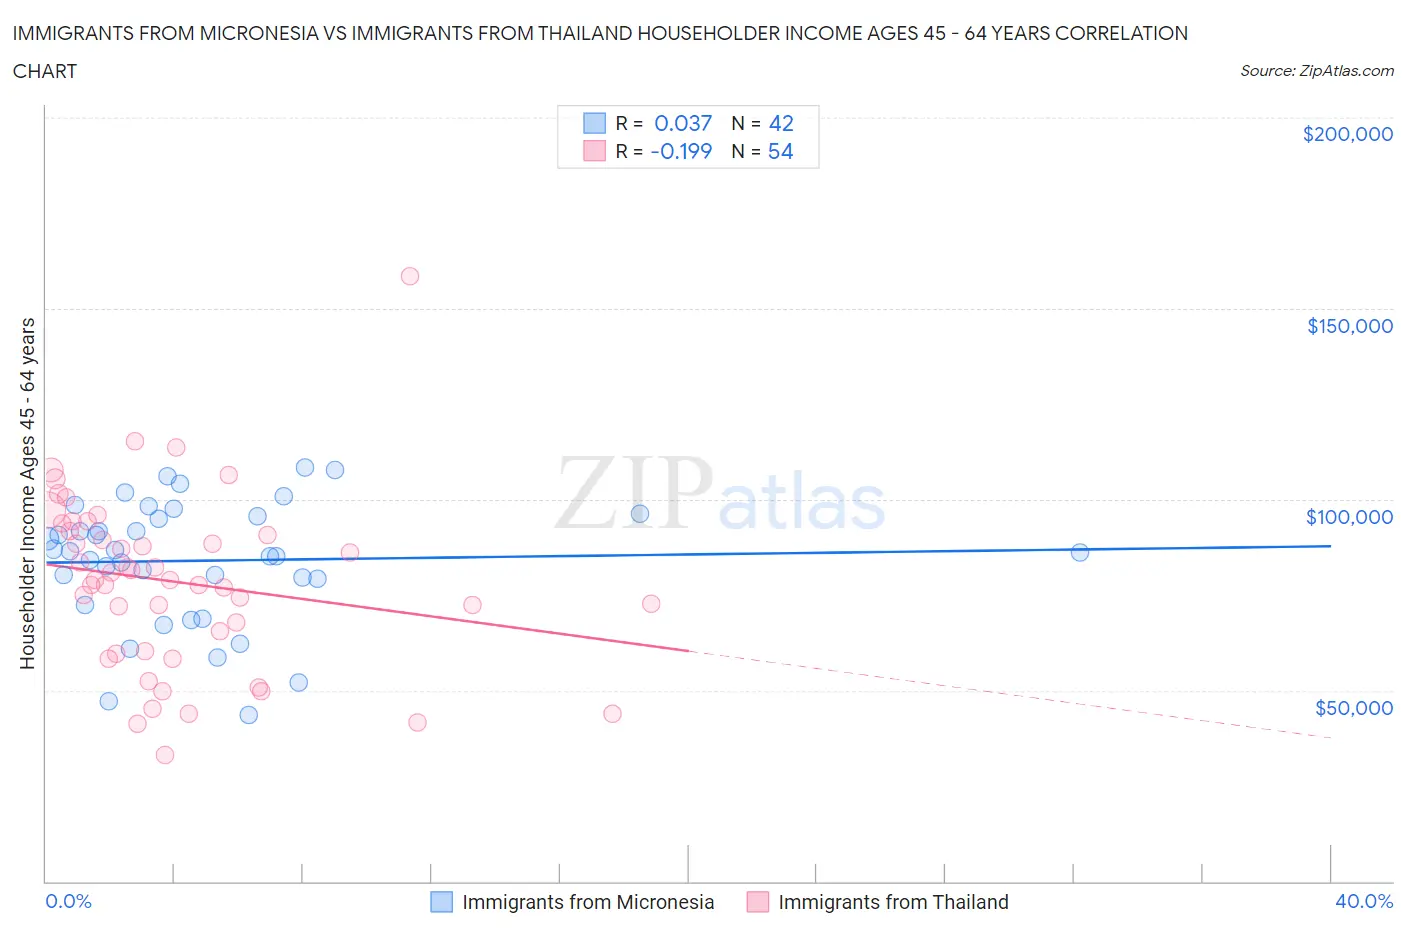 Immigrants from Micronesia vs Immigrants from Thailand Householder Income Ages 45 - 64 years